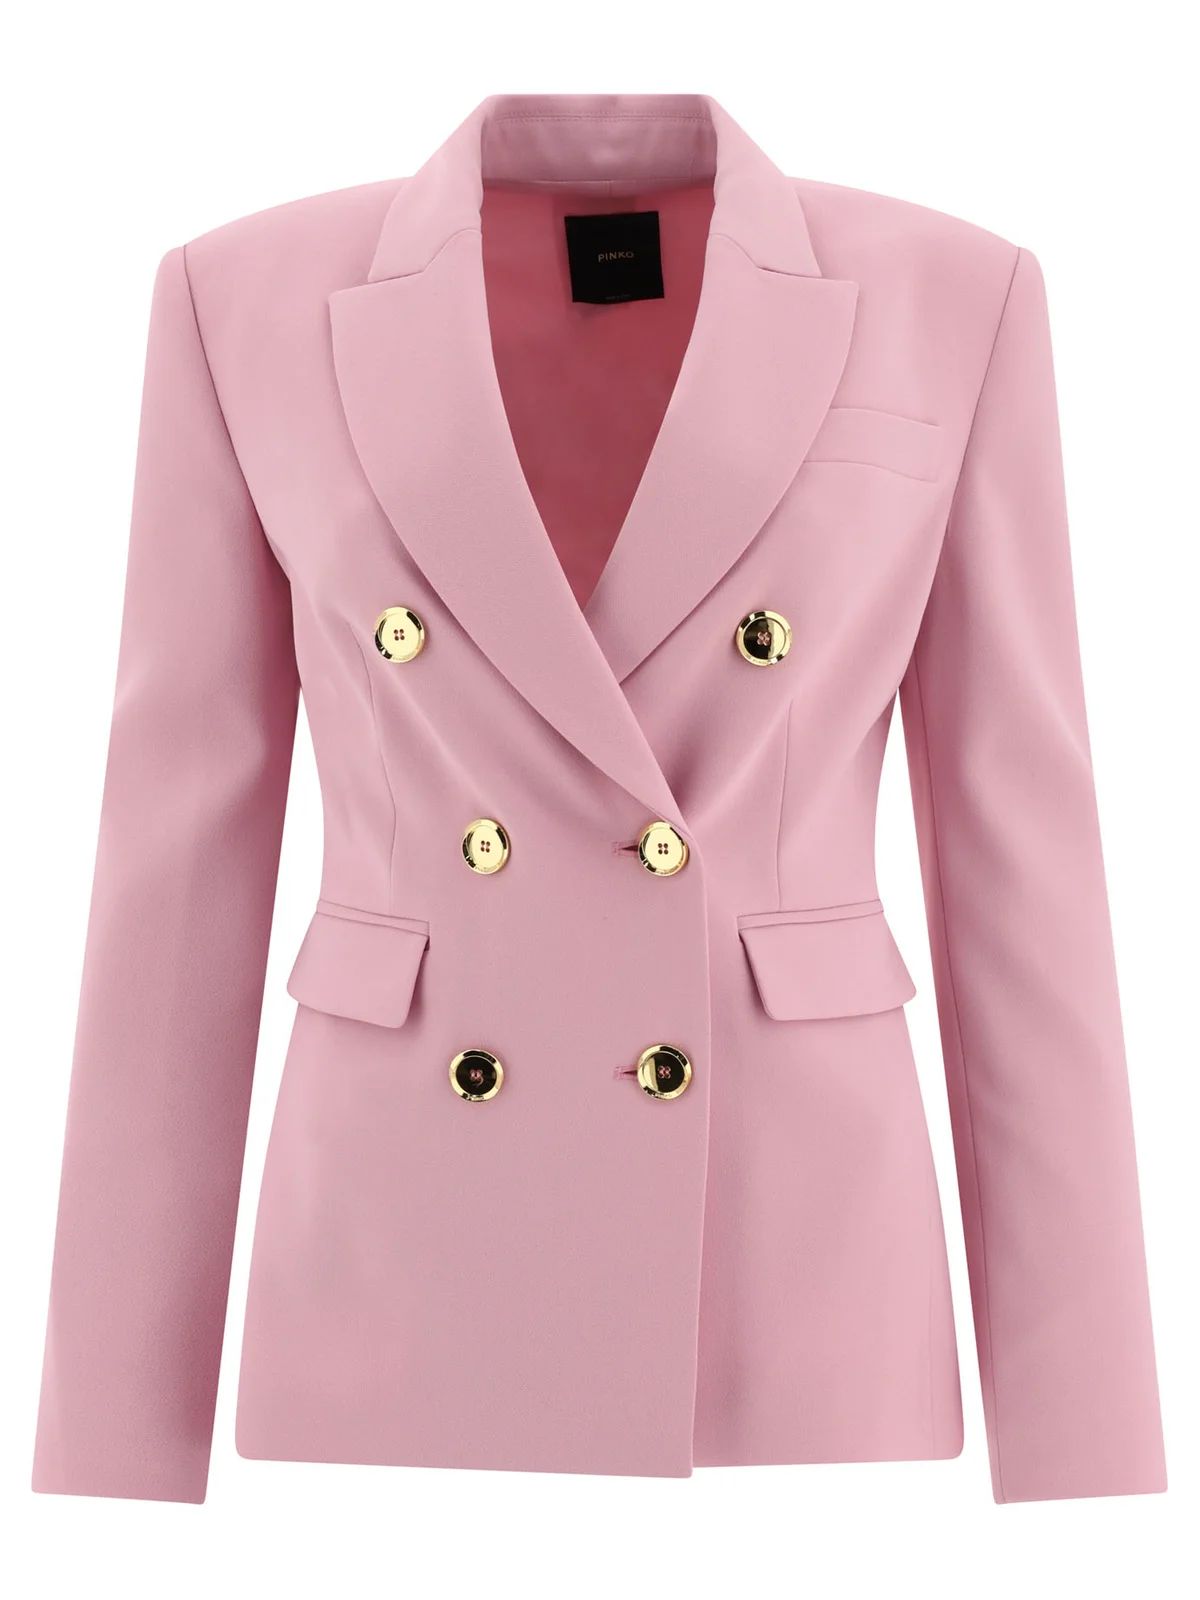 Pinko Double-Breasted Blazer | Cettire Global